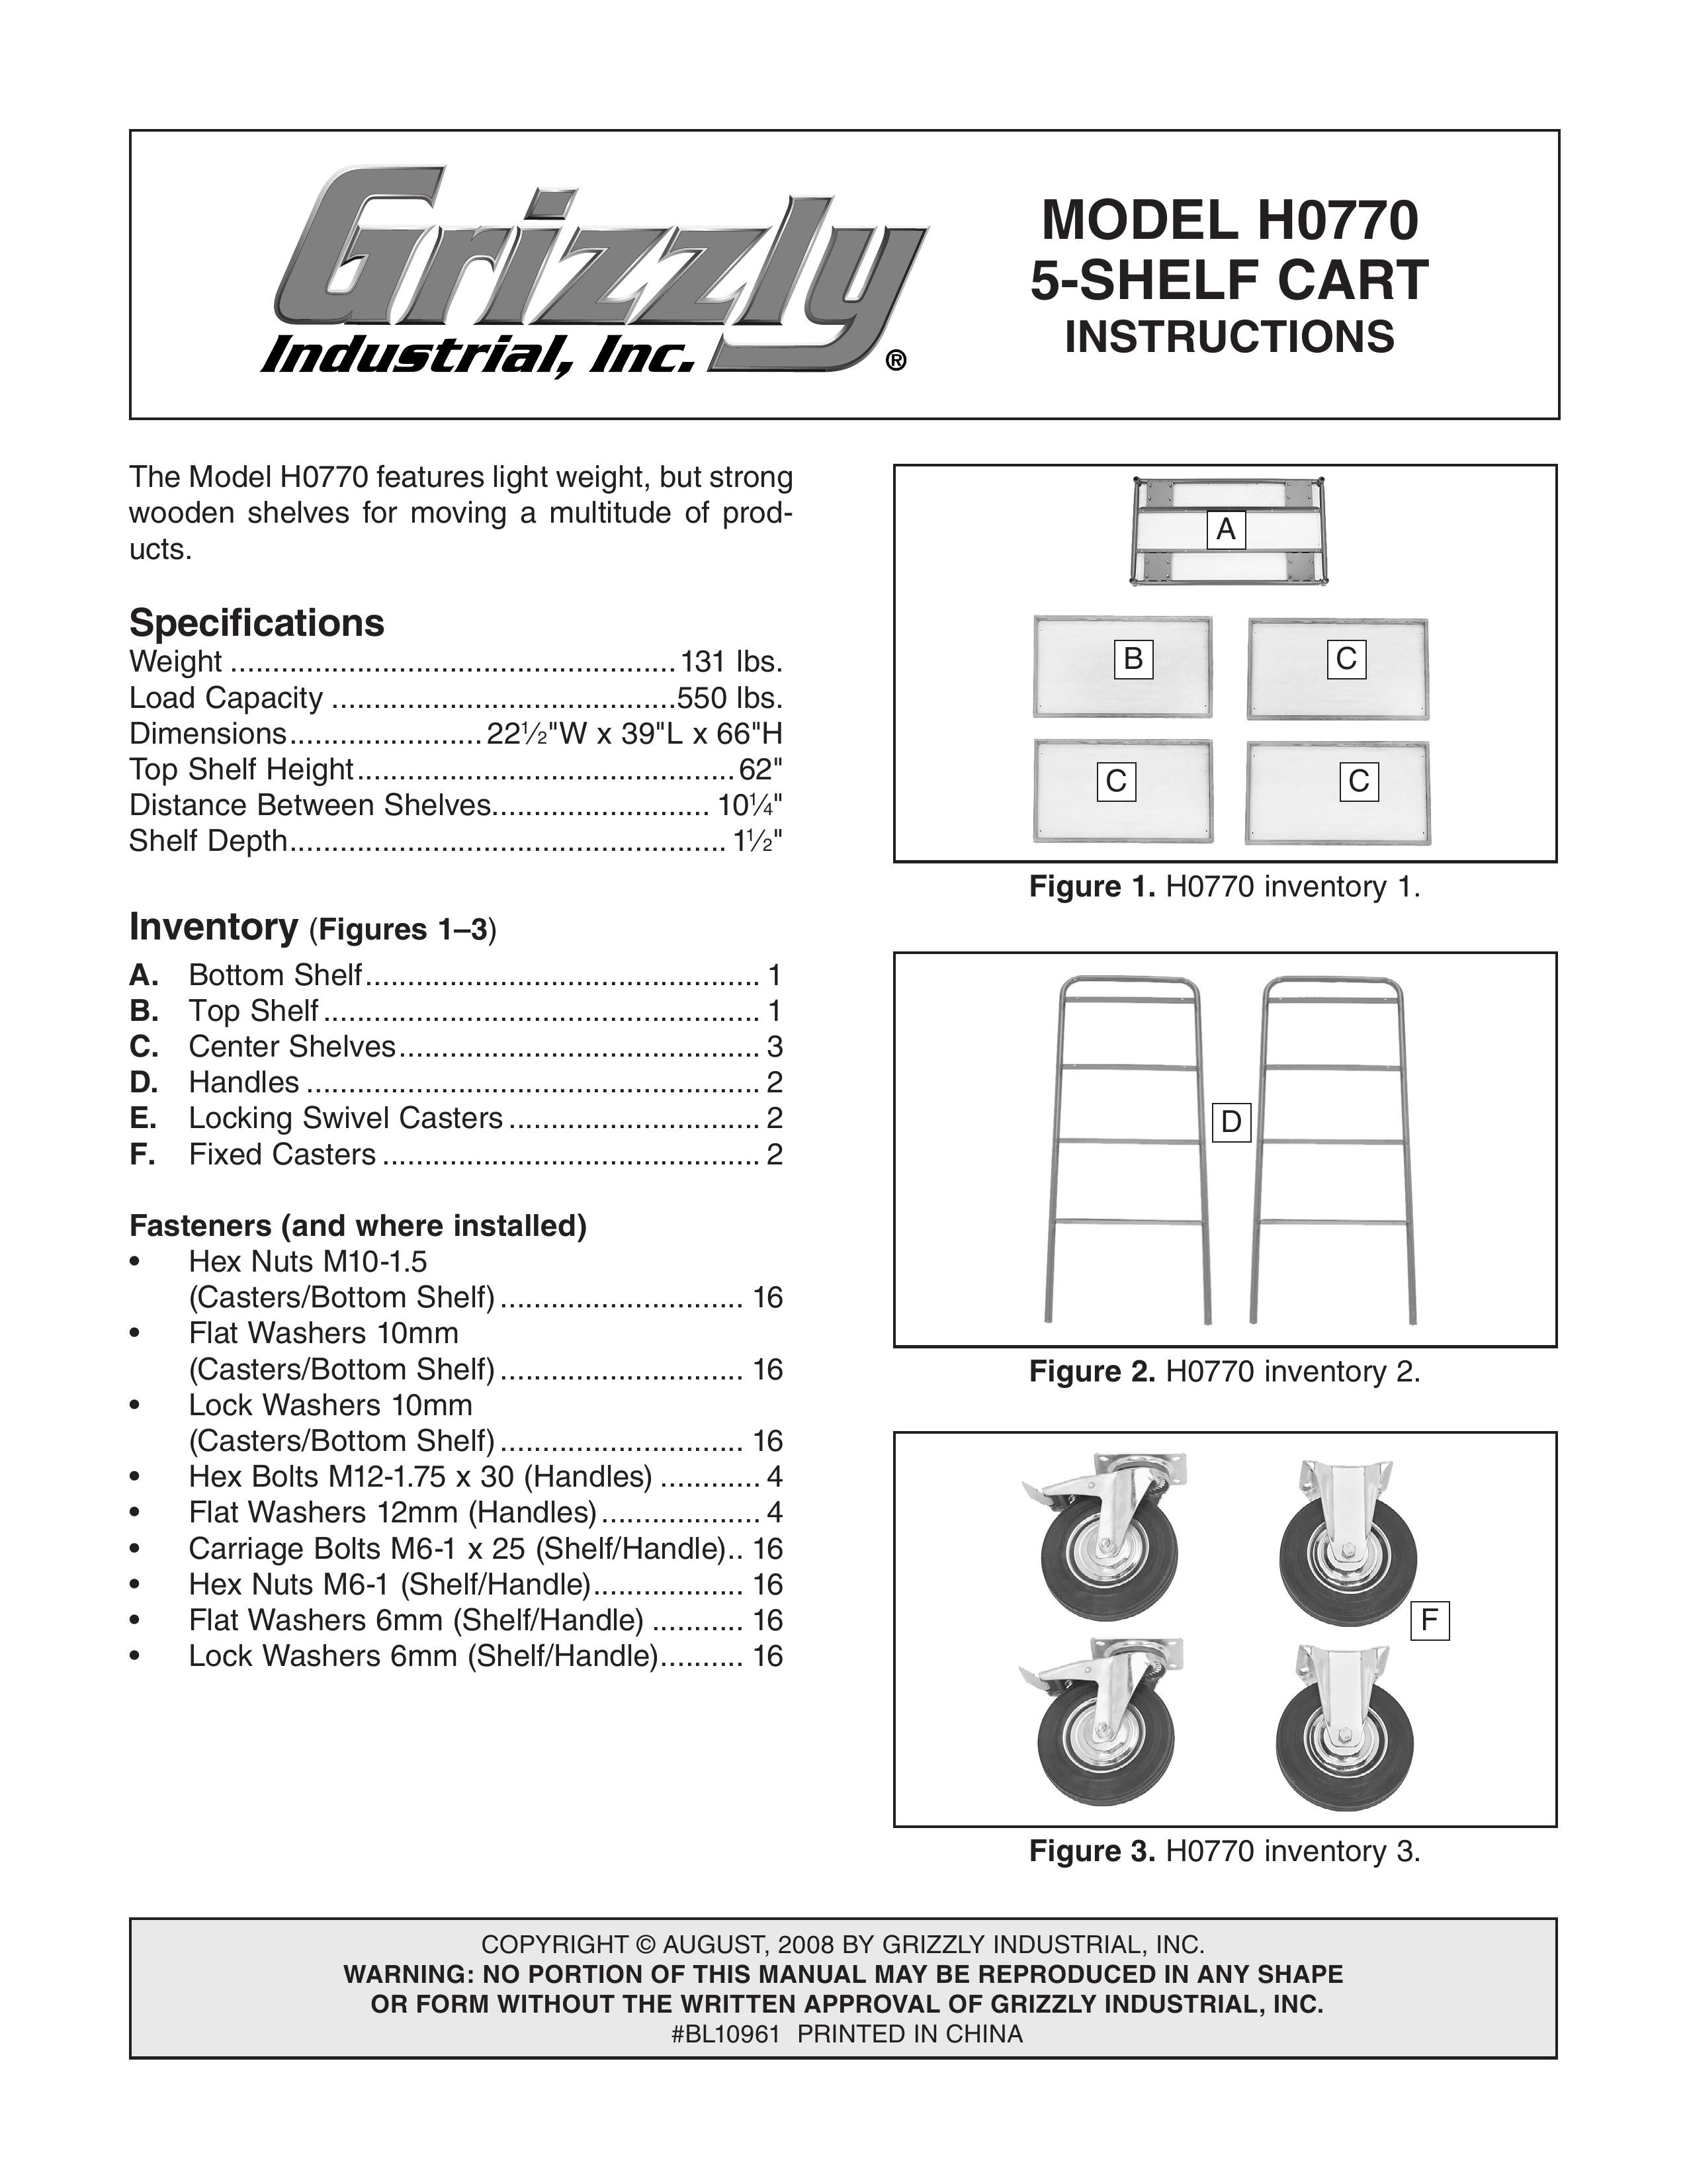 Grizzly H0770 Outdoor Cart User Manual